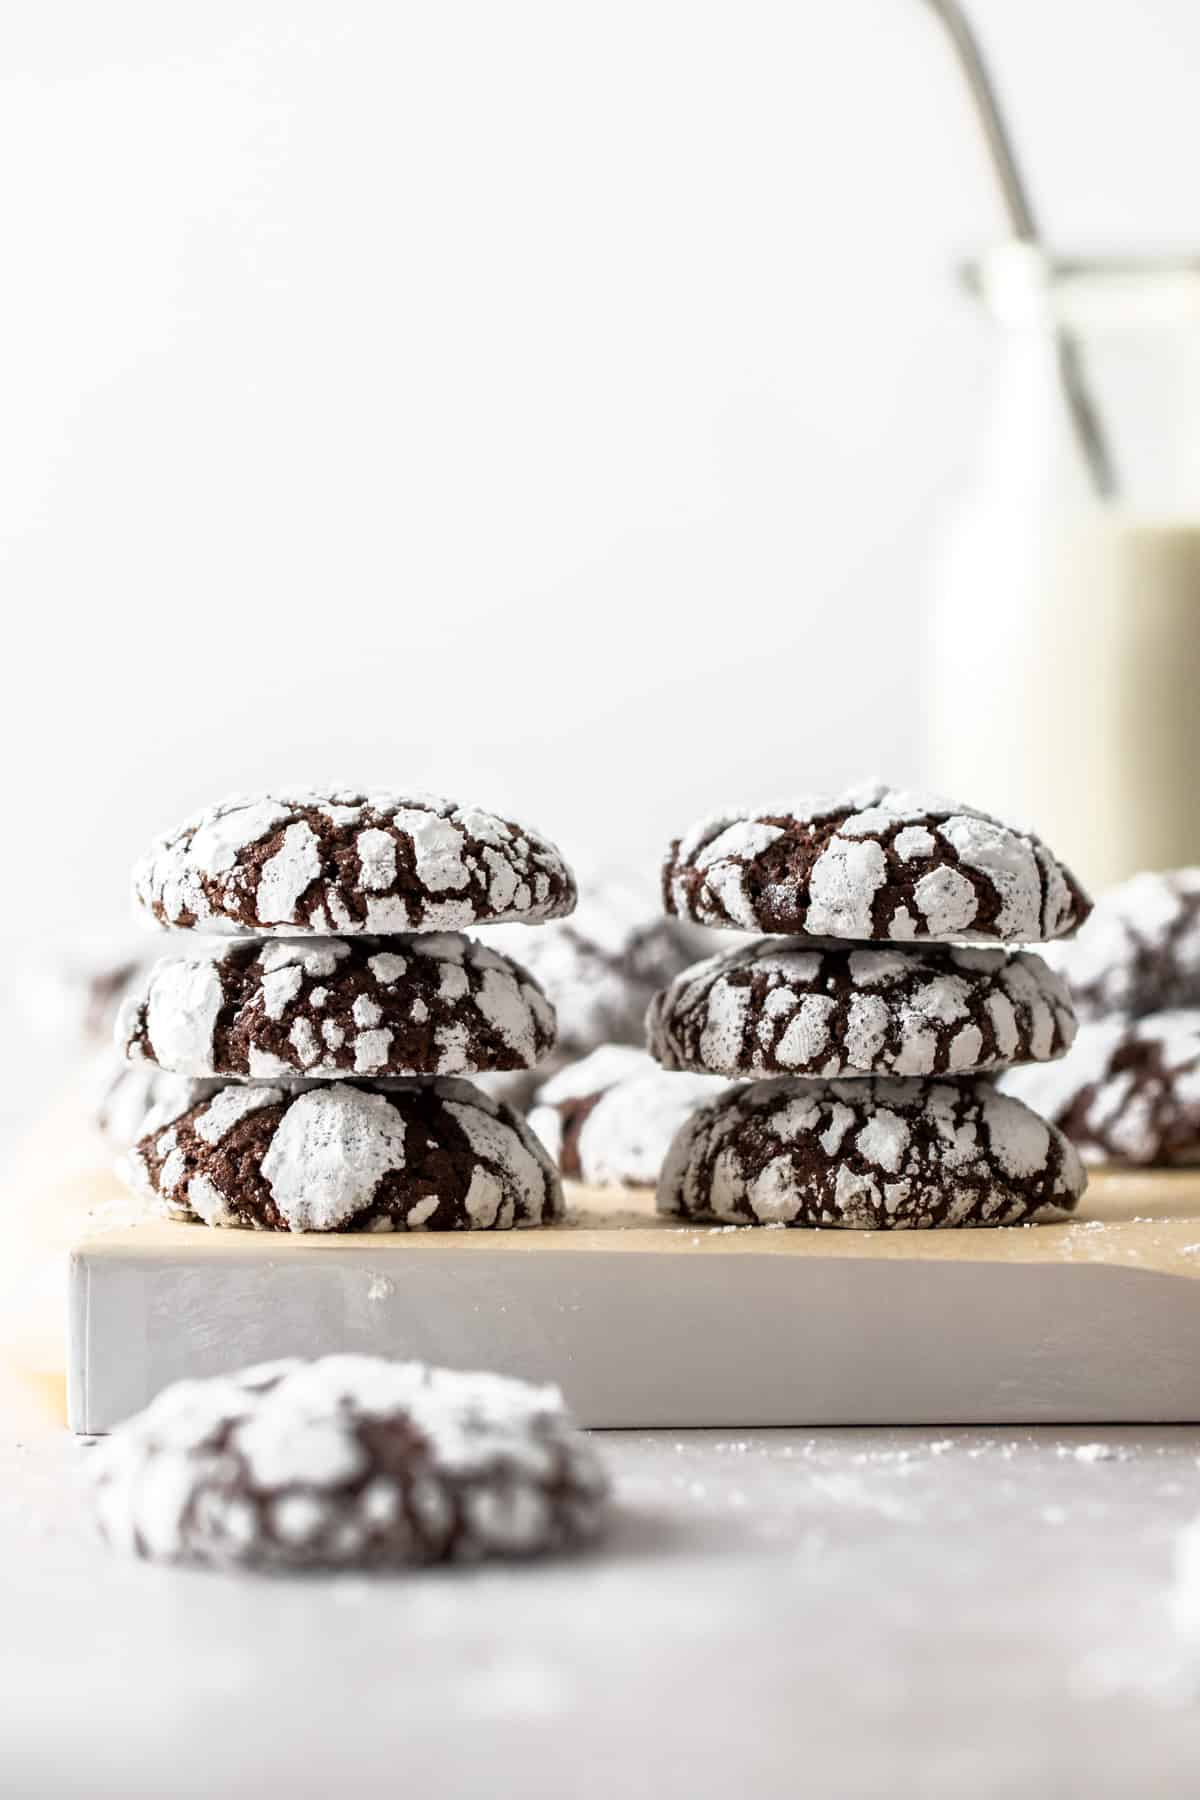 stacks of chocolate crinkle cookies with glass of milk in background